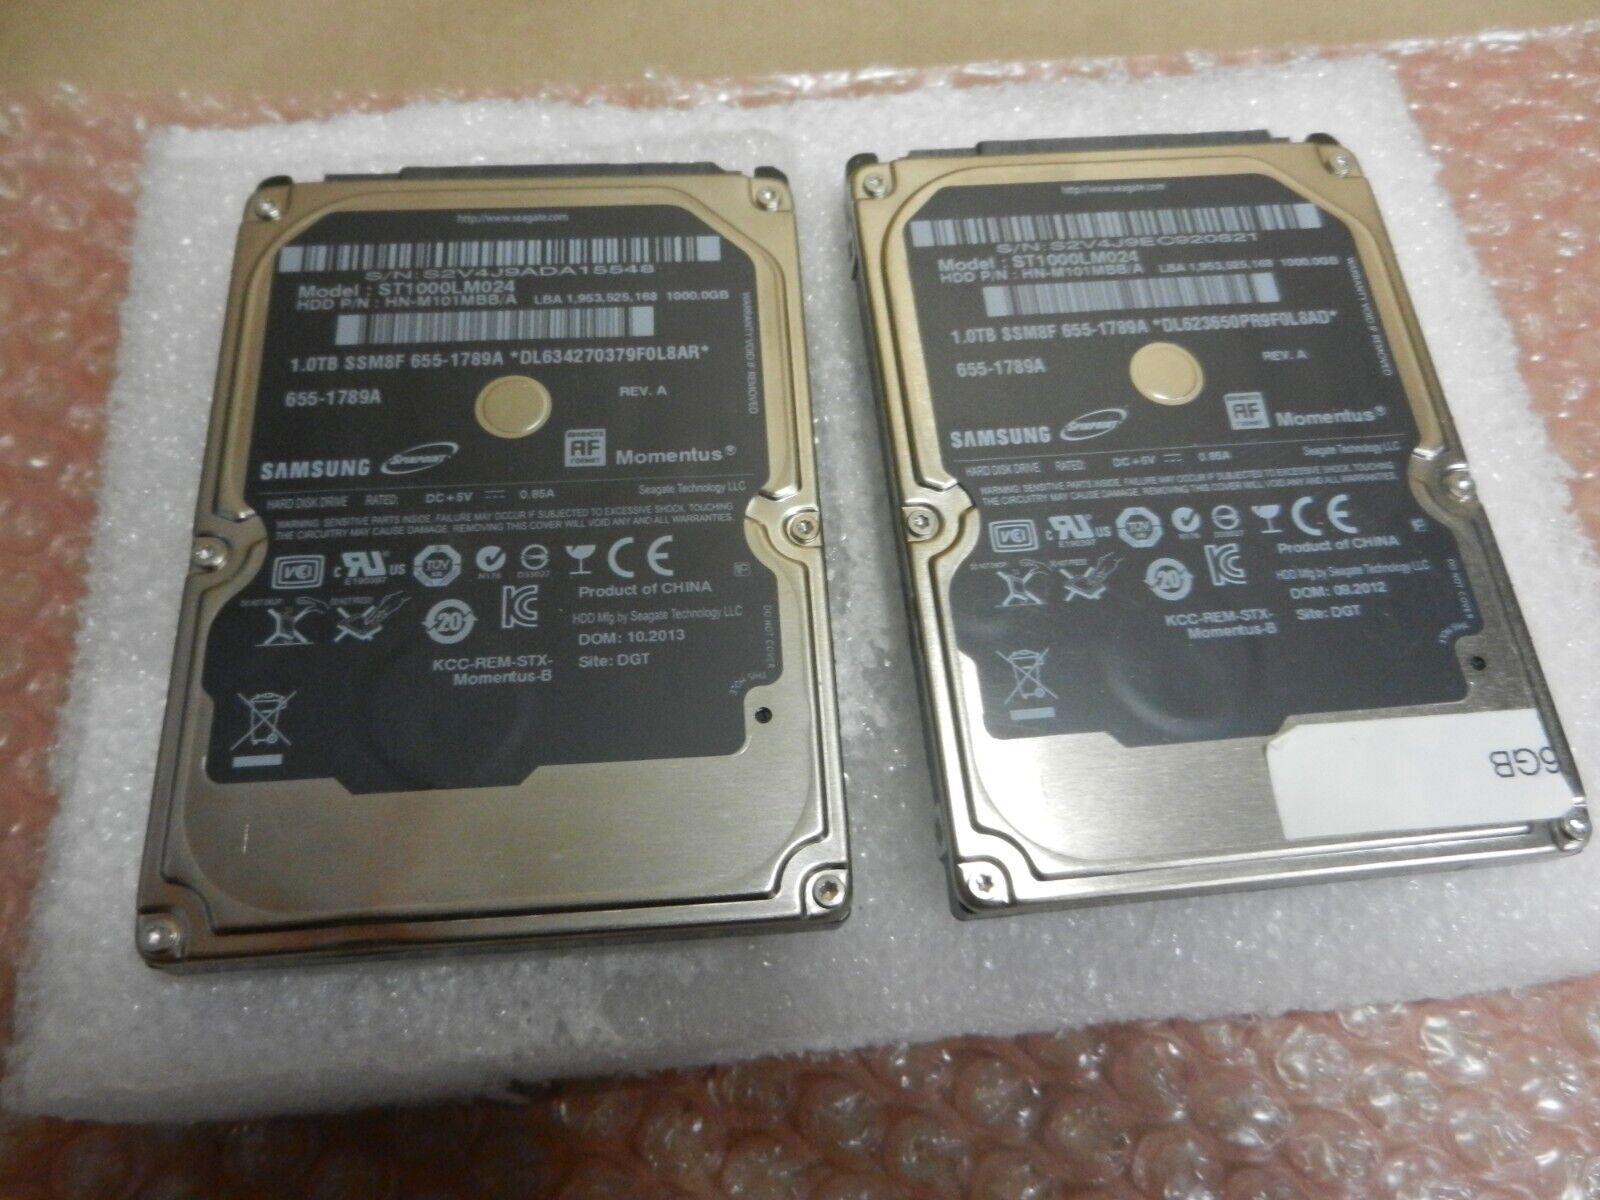 2X Samsung Spinpoint 1TB Laptop Hard Disk Drive HDD / ST1000LM024 / HN-M101MBB/A